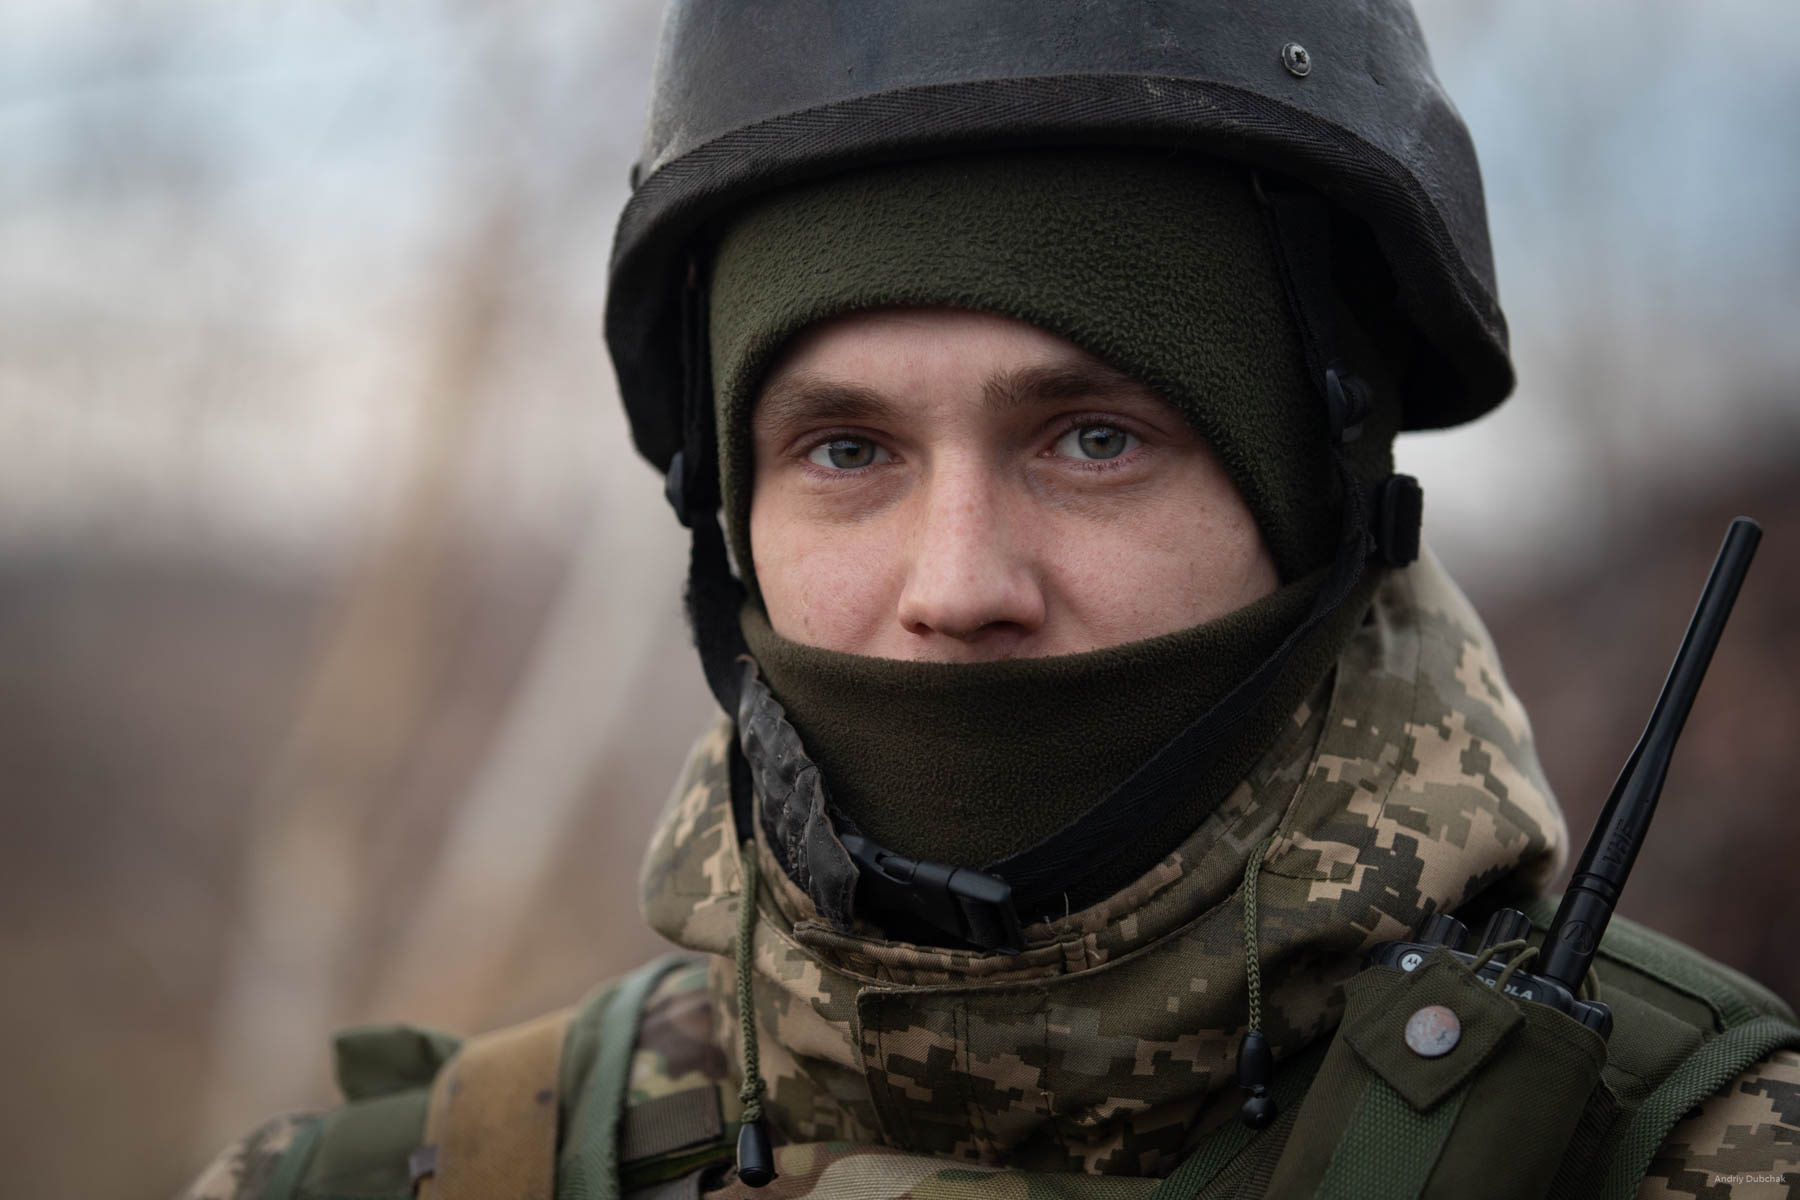 Alexander is 28 years old. Originally, from Chernigov region, he speaks calmly, confidently, logically. He is in the war since 2014, started fighting with the first wave of mobilization. Three months later, he was discharged for some reason. In 2015, he was called up for military service again with the sixth wave of mobilization. He served 15 months mobilization duty, and then remained for a half-year contract.  After that he returned home for six months, could not stand it and signed the contract. In a matter of a split second after this photo shot, we were shot at by an enemy sniper.  (Video of this moment: https://goo.gl/pBeMHU) It was a narrow escape, but a week later, a sniper tapped the boy in the head. 7.62 bullet came under the helmet - the brain was injured. Now, he is slowly recovers and undergoes a long rehab in Lviv. District of Popasnoy, December 2017